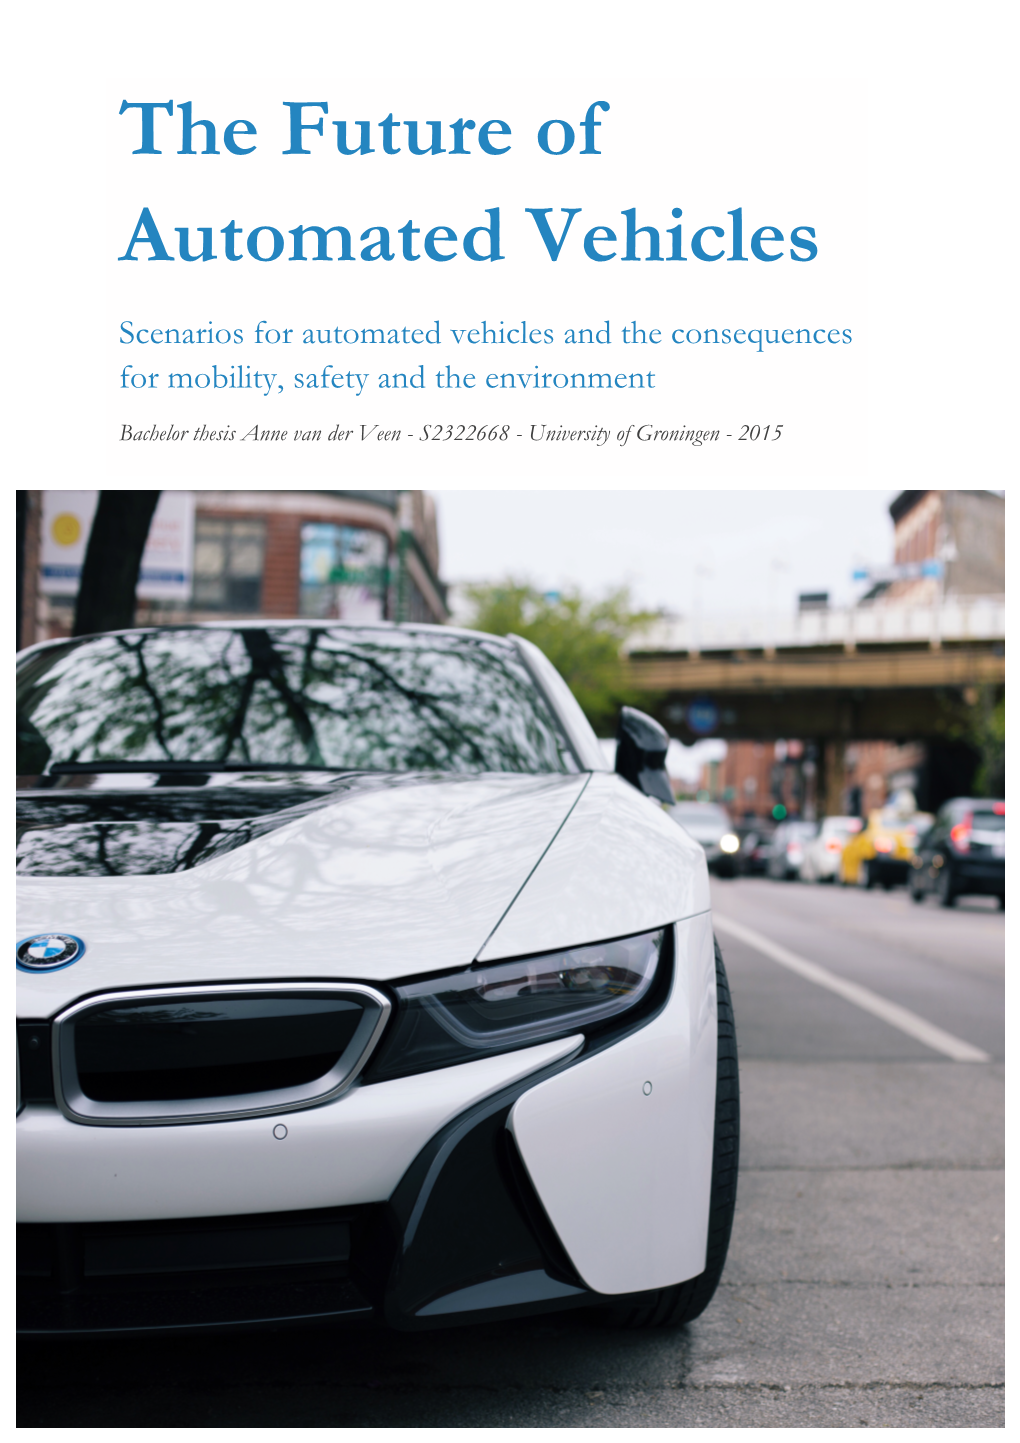 The Future of Automated Vehicles and Assert That a Certain Kind of Vehicle Is Likely to Succeed, E.G